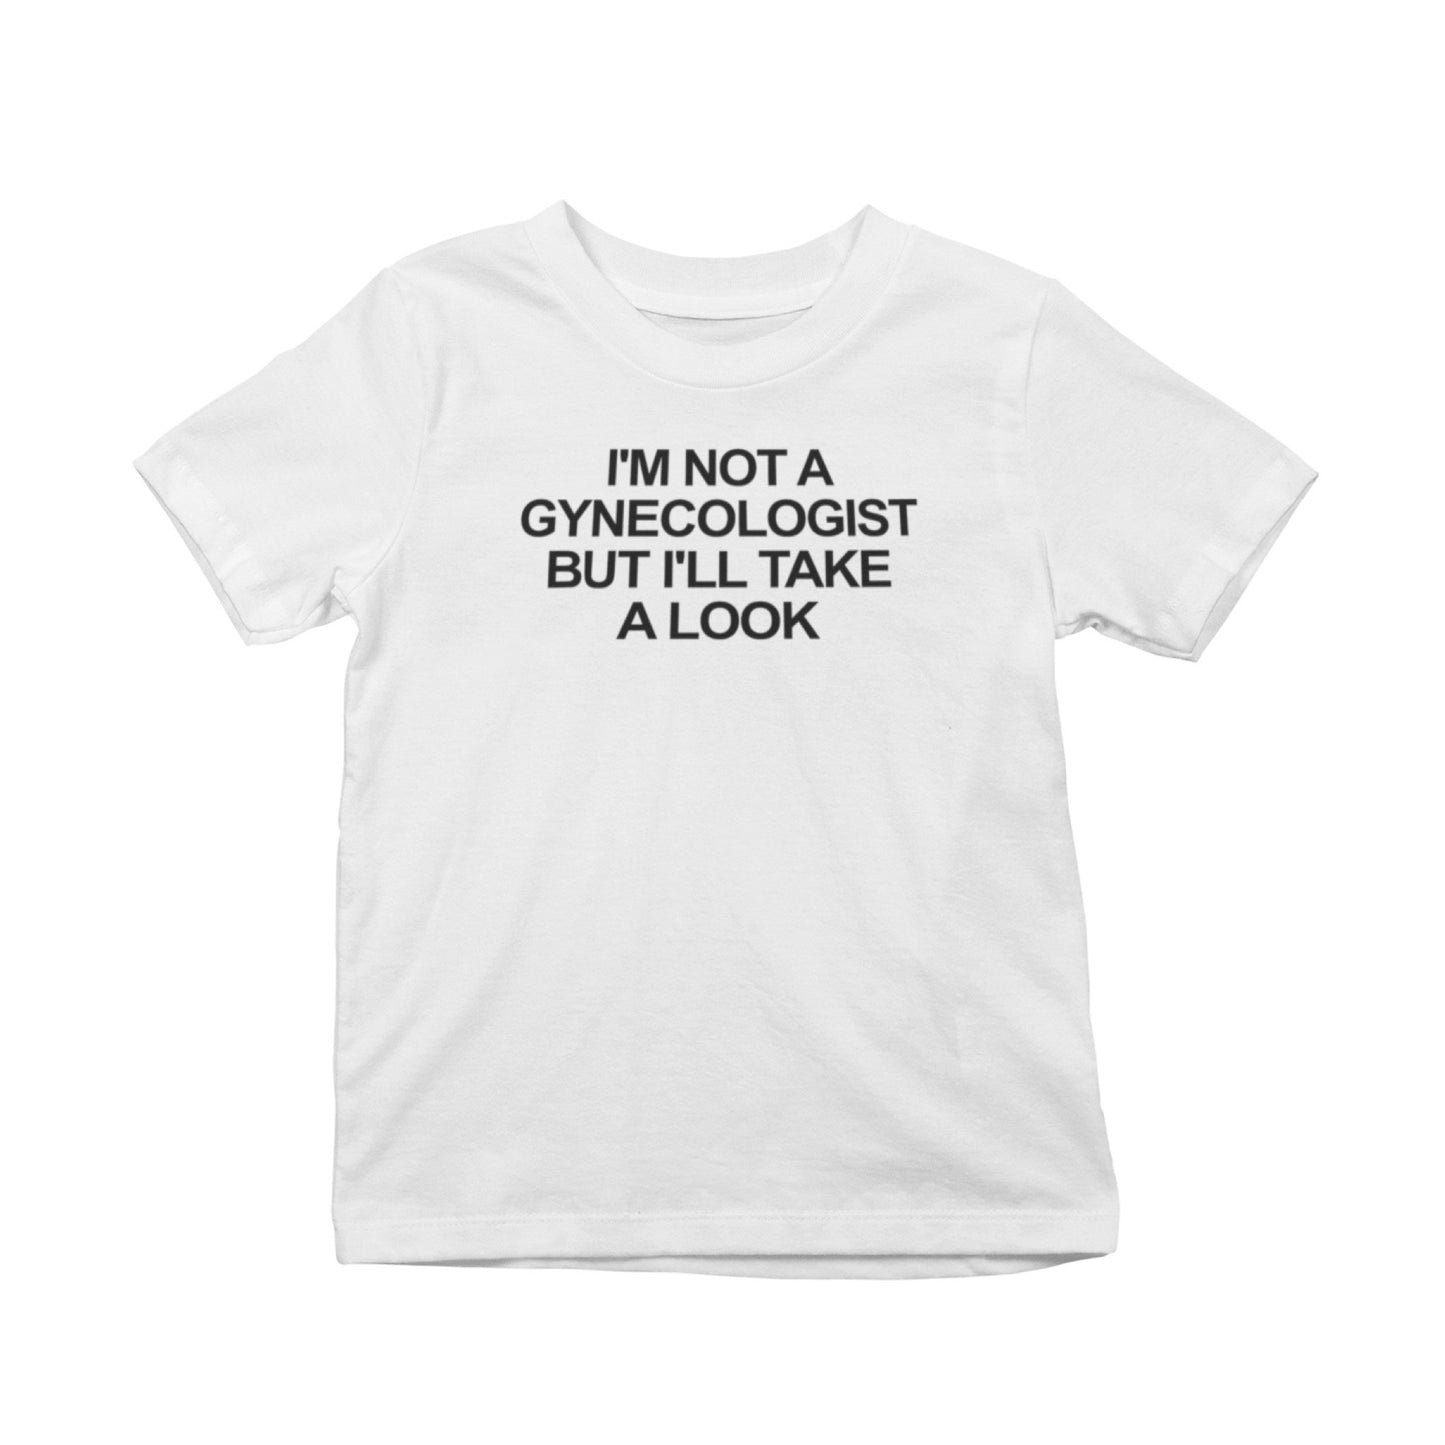 I'm Not a Gynecologist But I'll Take a Look T-Shirt